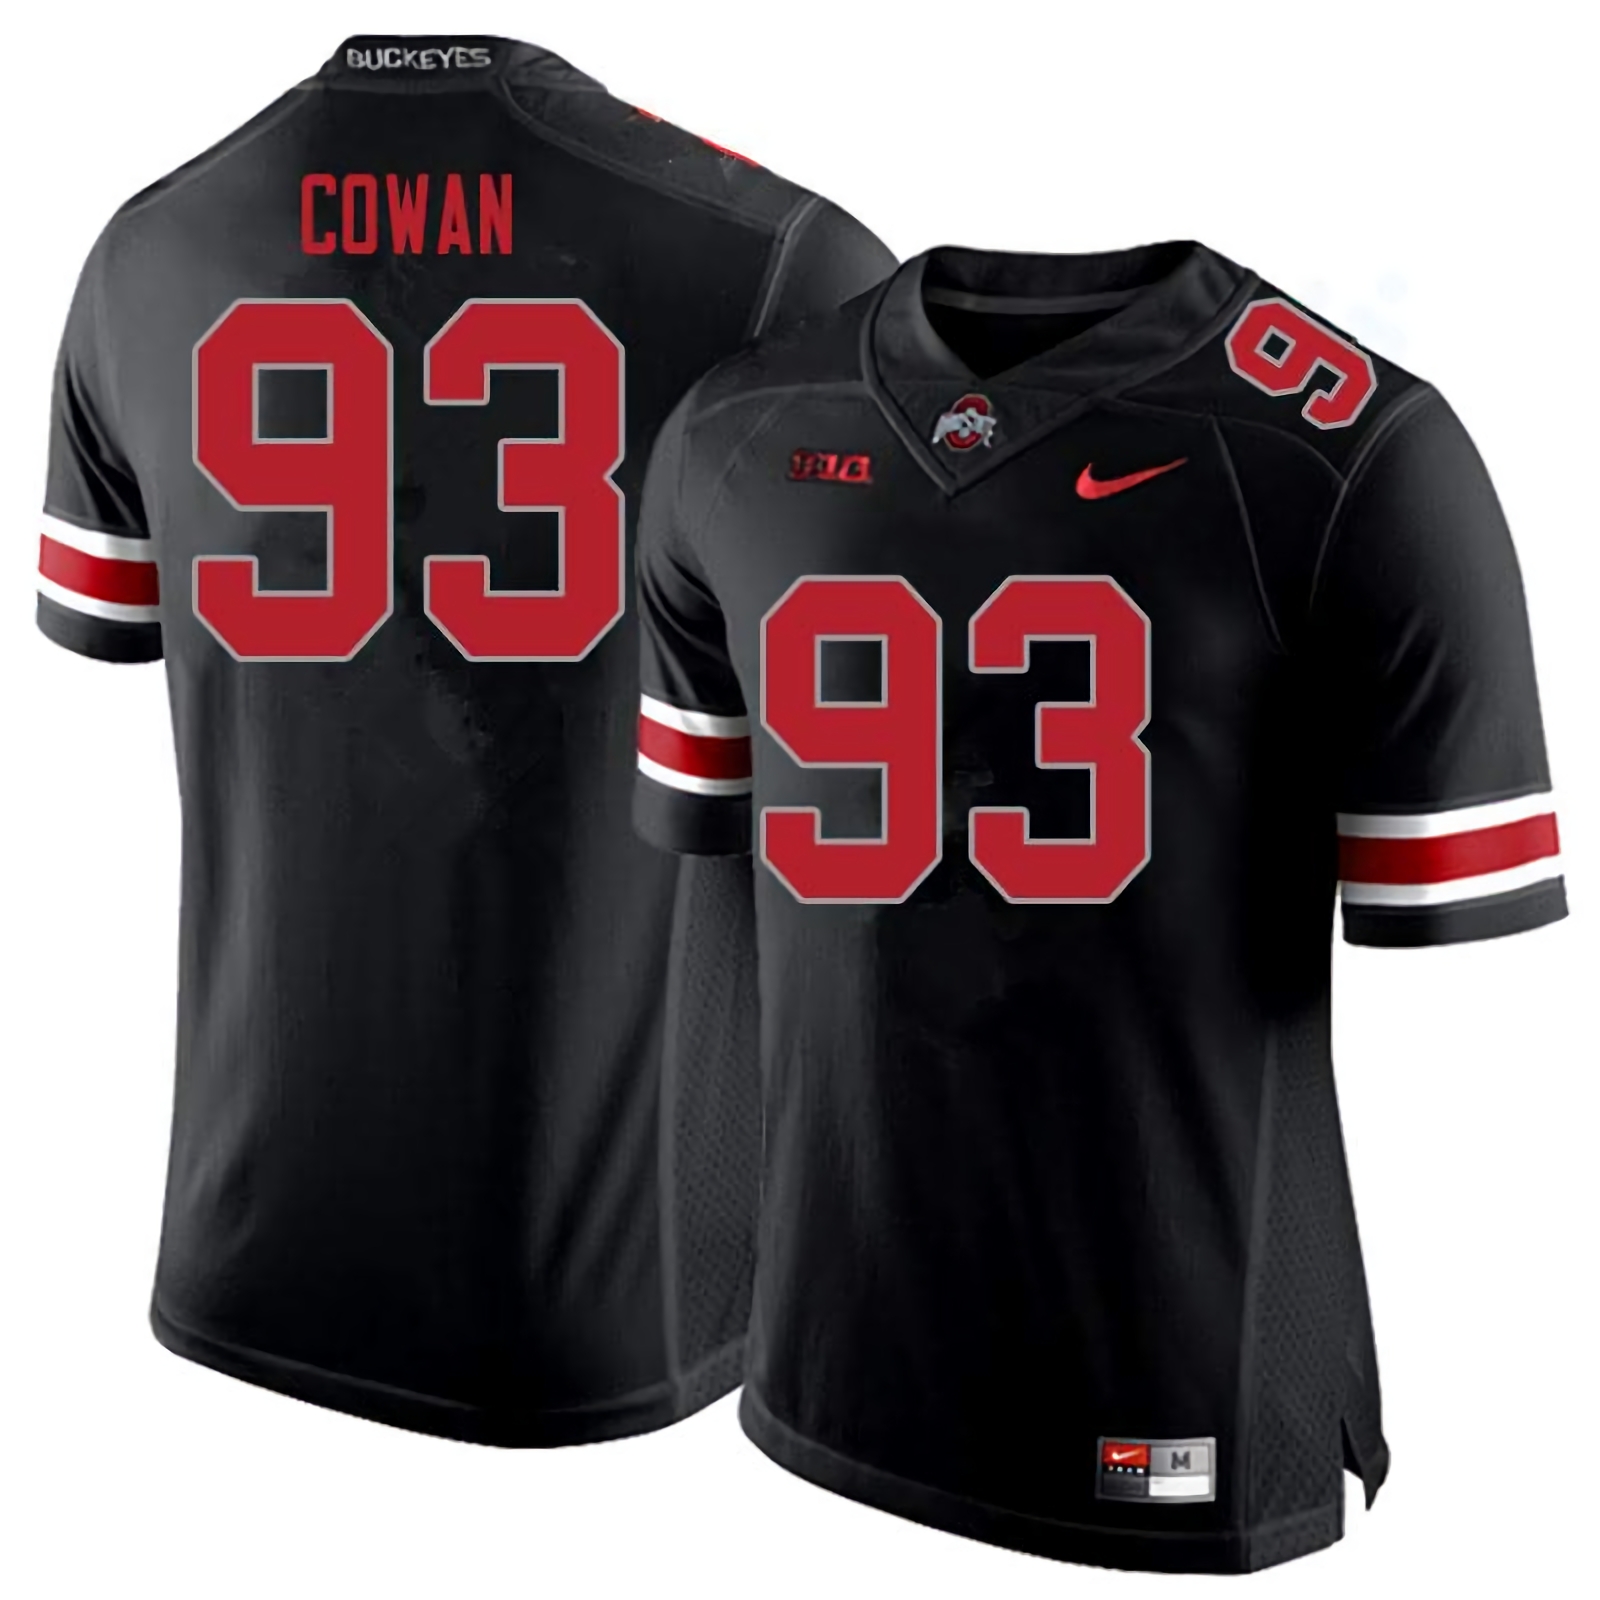 Jacolbe Cowan Ohio State Buckeyes Men's NCAA #93 Nike Blackout College Stitched Football Jersey CNK4056DL